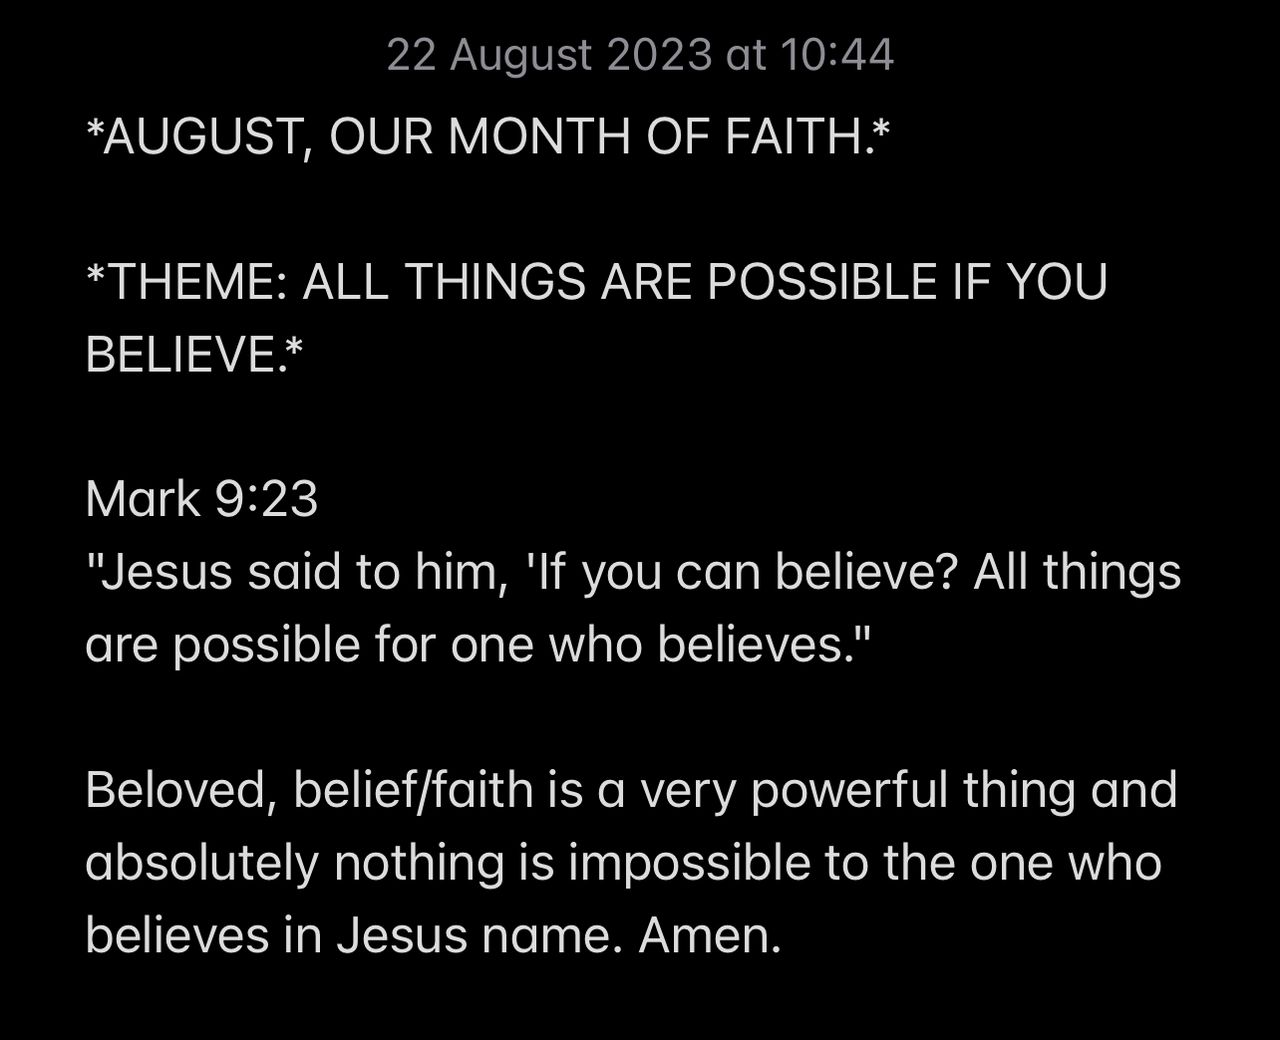 ALL THINGS ARE POSSIBLE IF YOU BELIEVE.